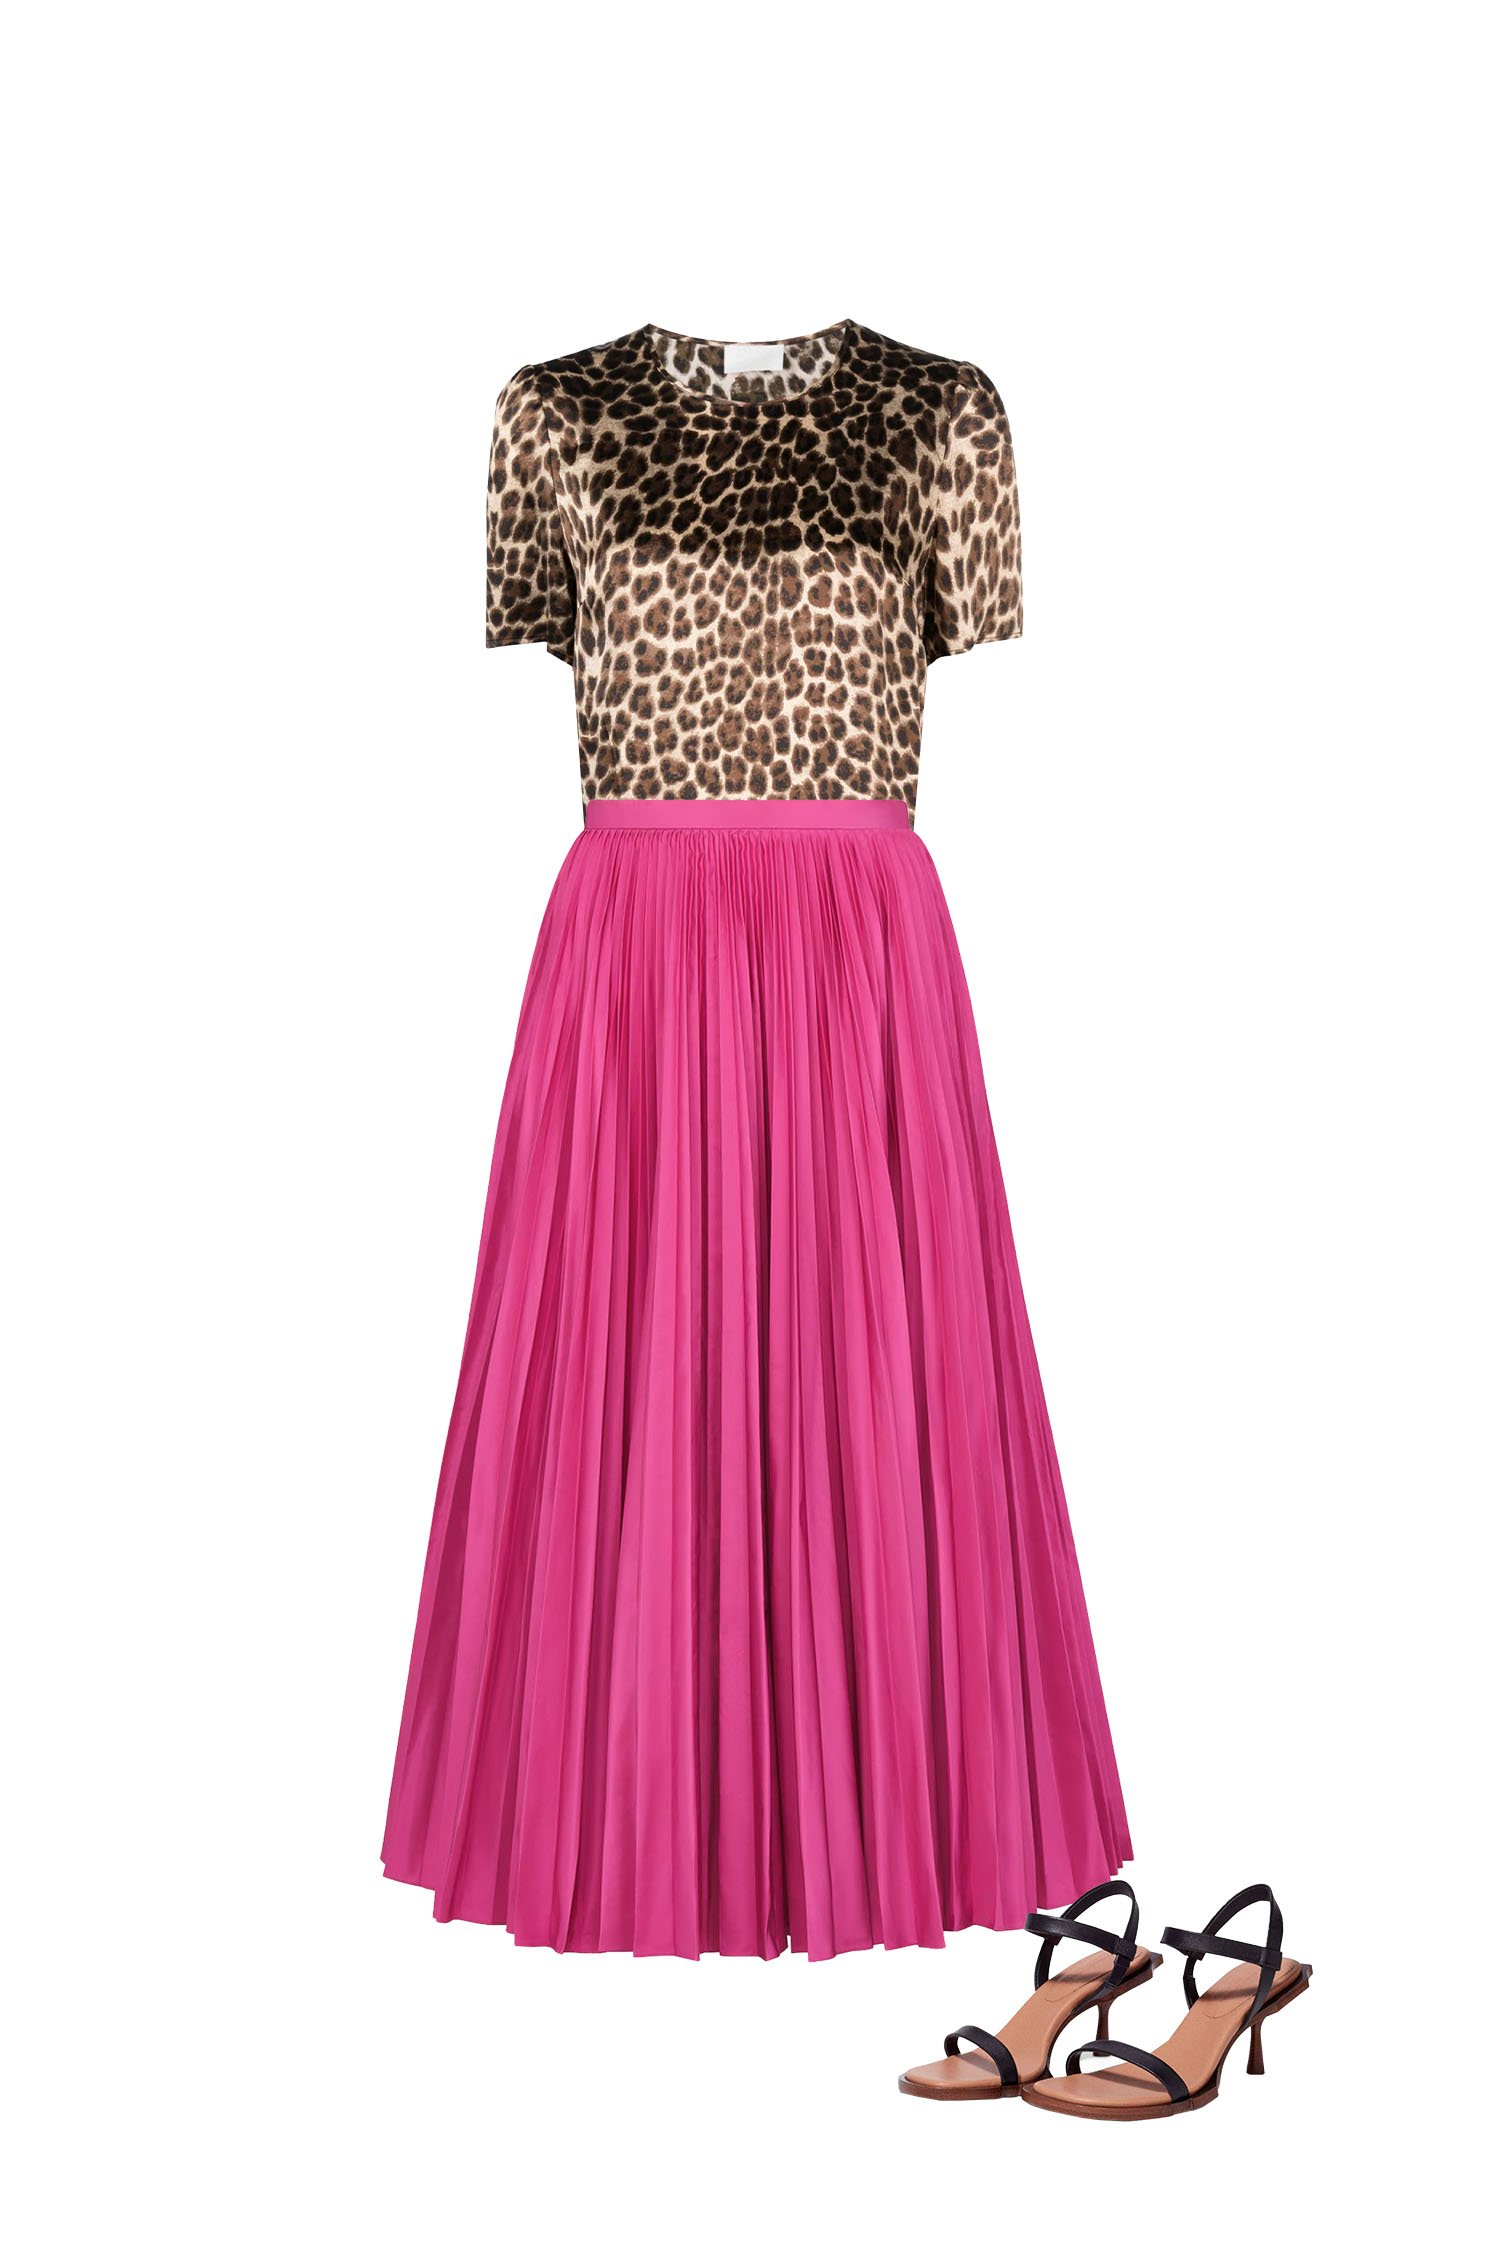 Hot Pink Pleated Skirt with Camel Leopard Print Top Outfit